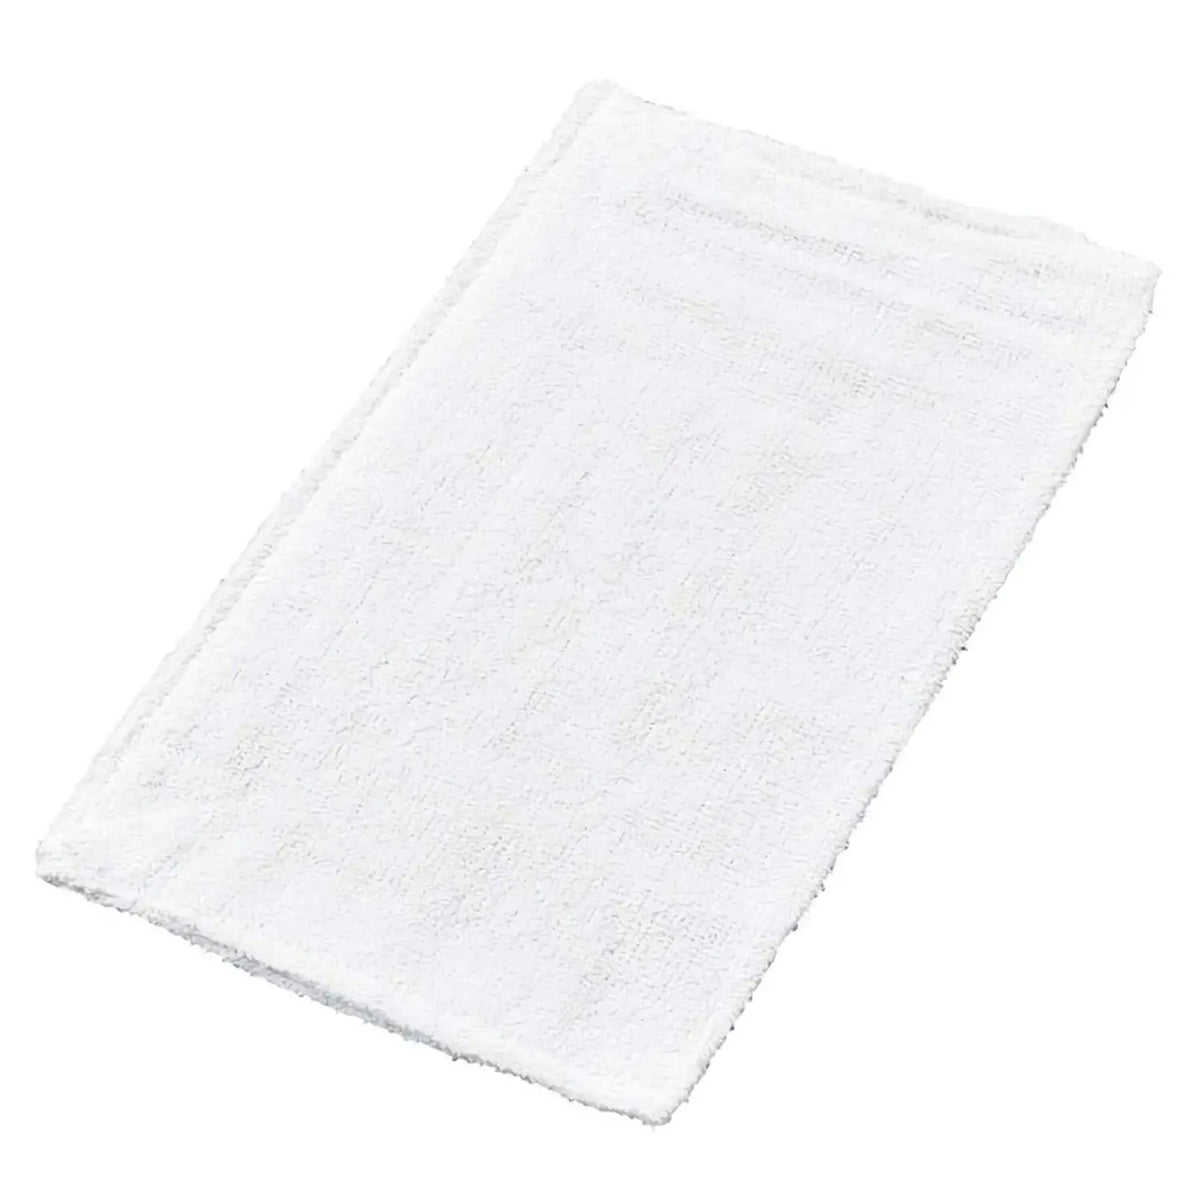 SATO TRADING Cotton Cleaning Cloth 300x200 mm 10 pcs